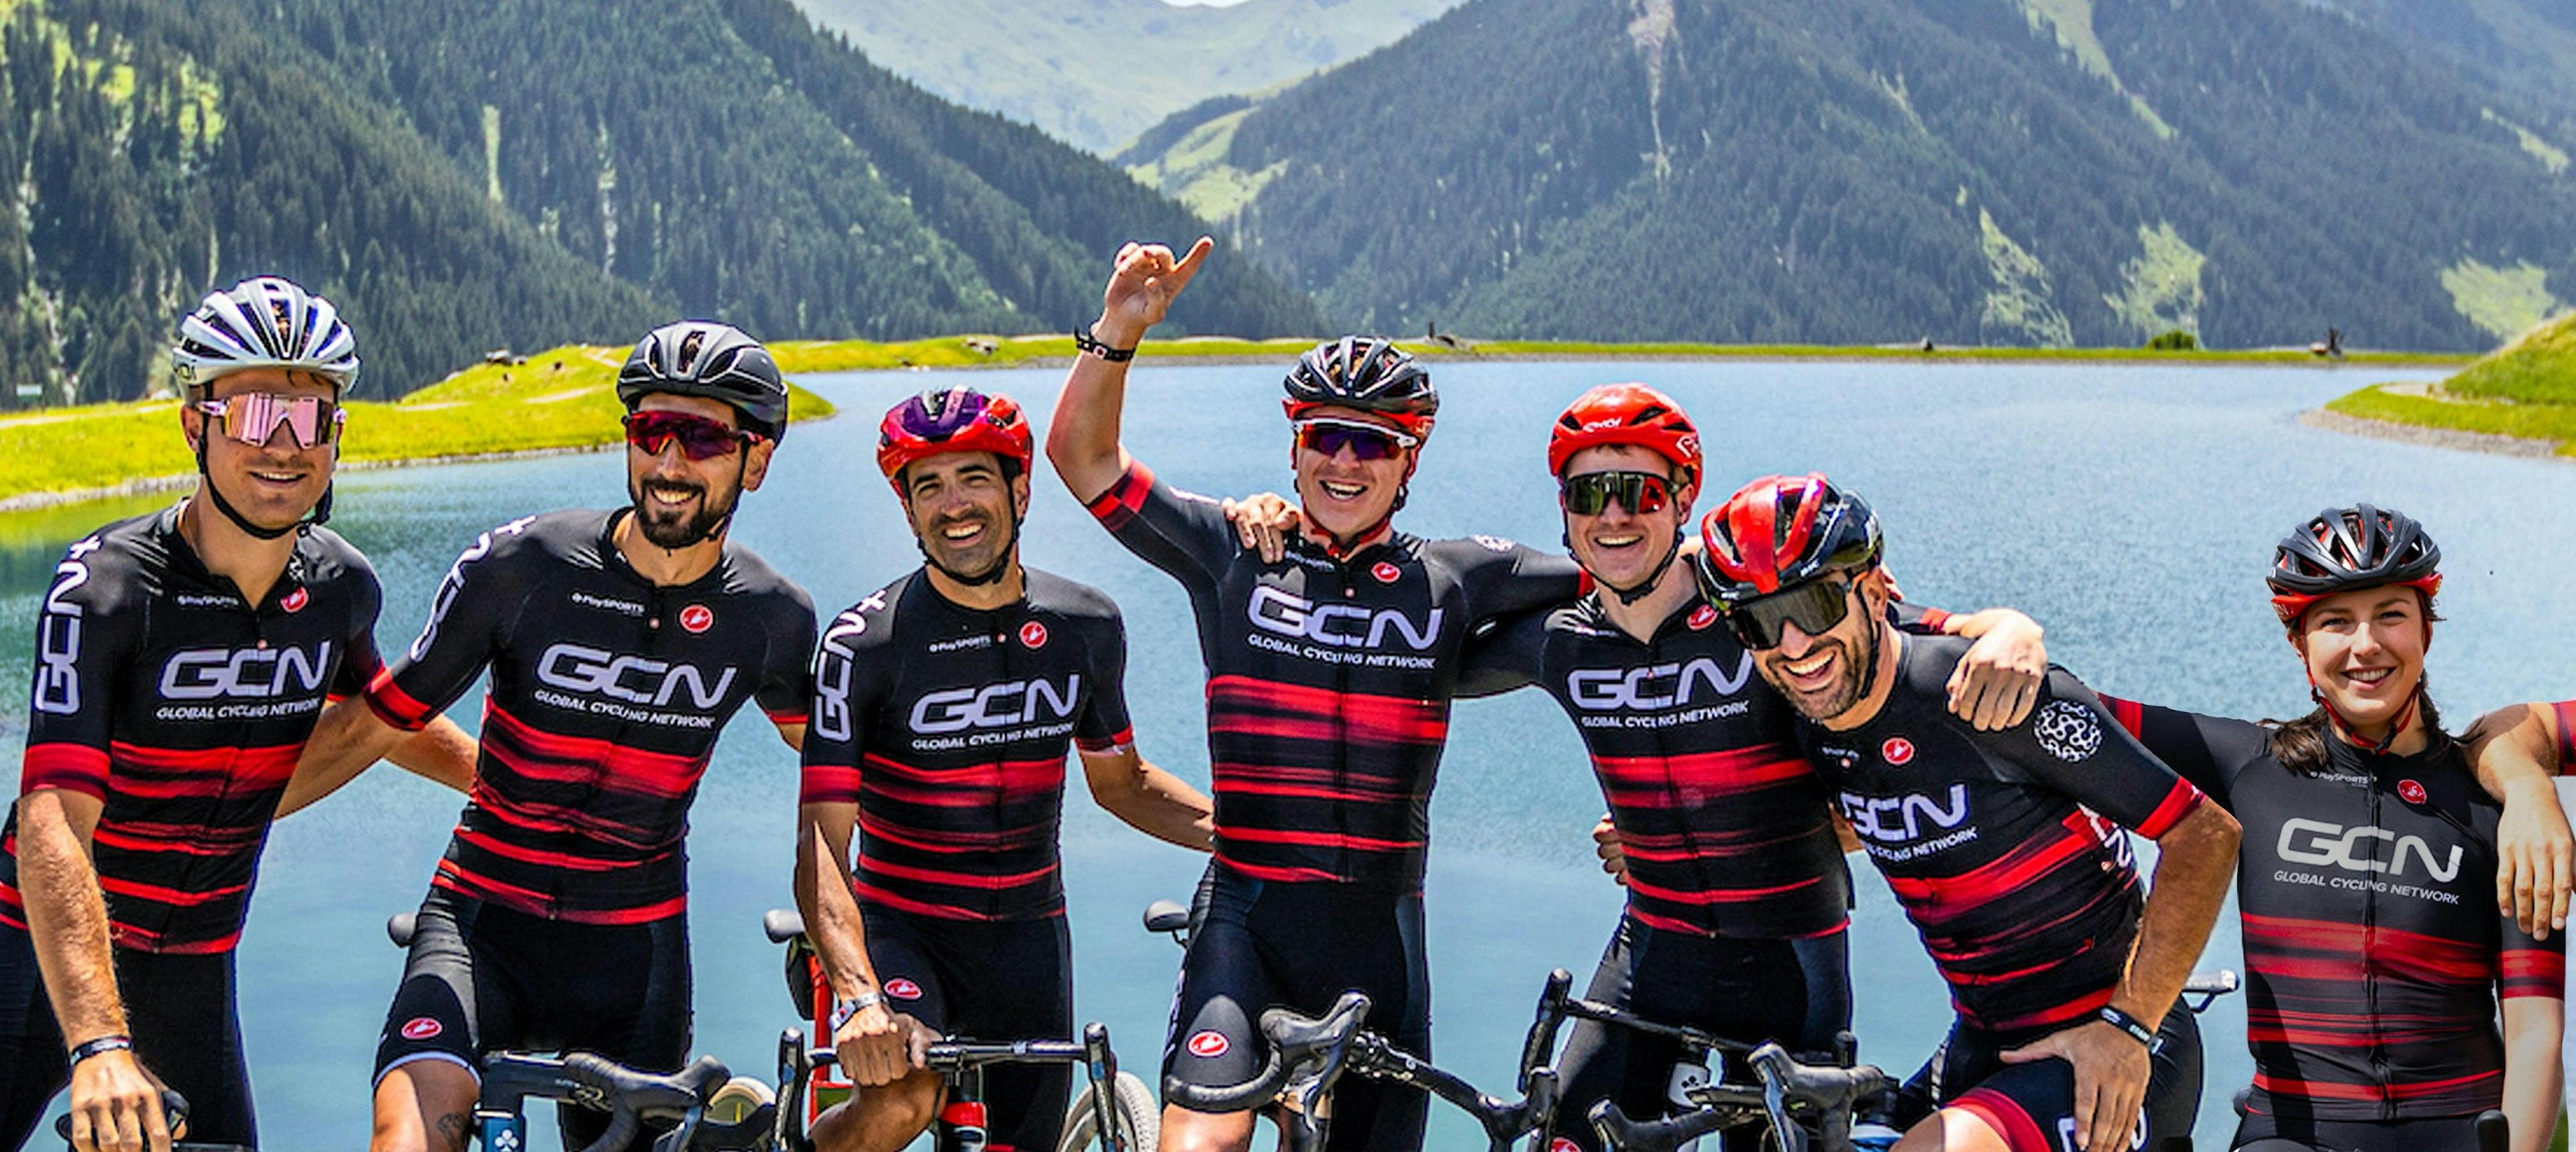 7 GCN presenters in GCN-branded cycling kit smile and laugh in a group whilst holding bikes. There's mountains and a lake in the background